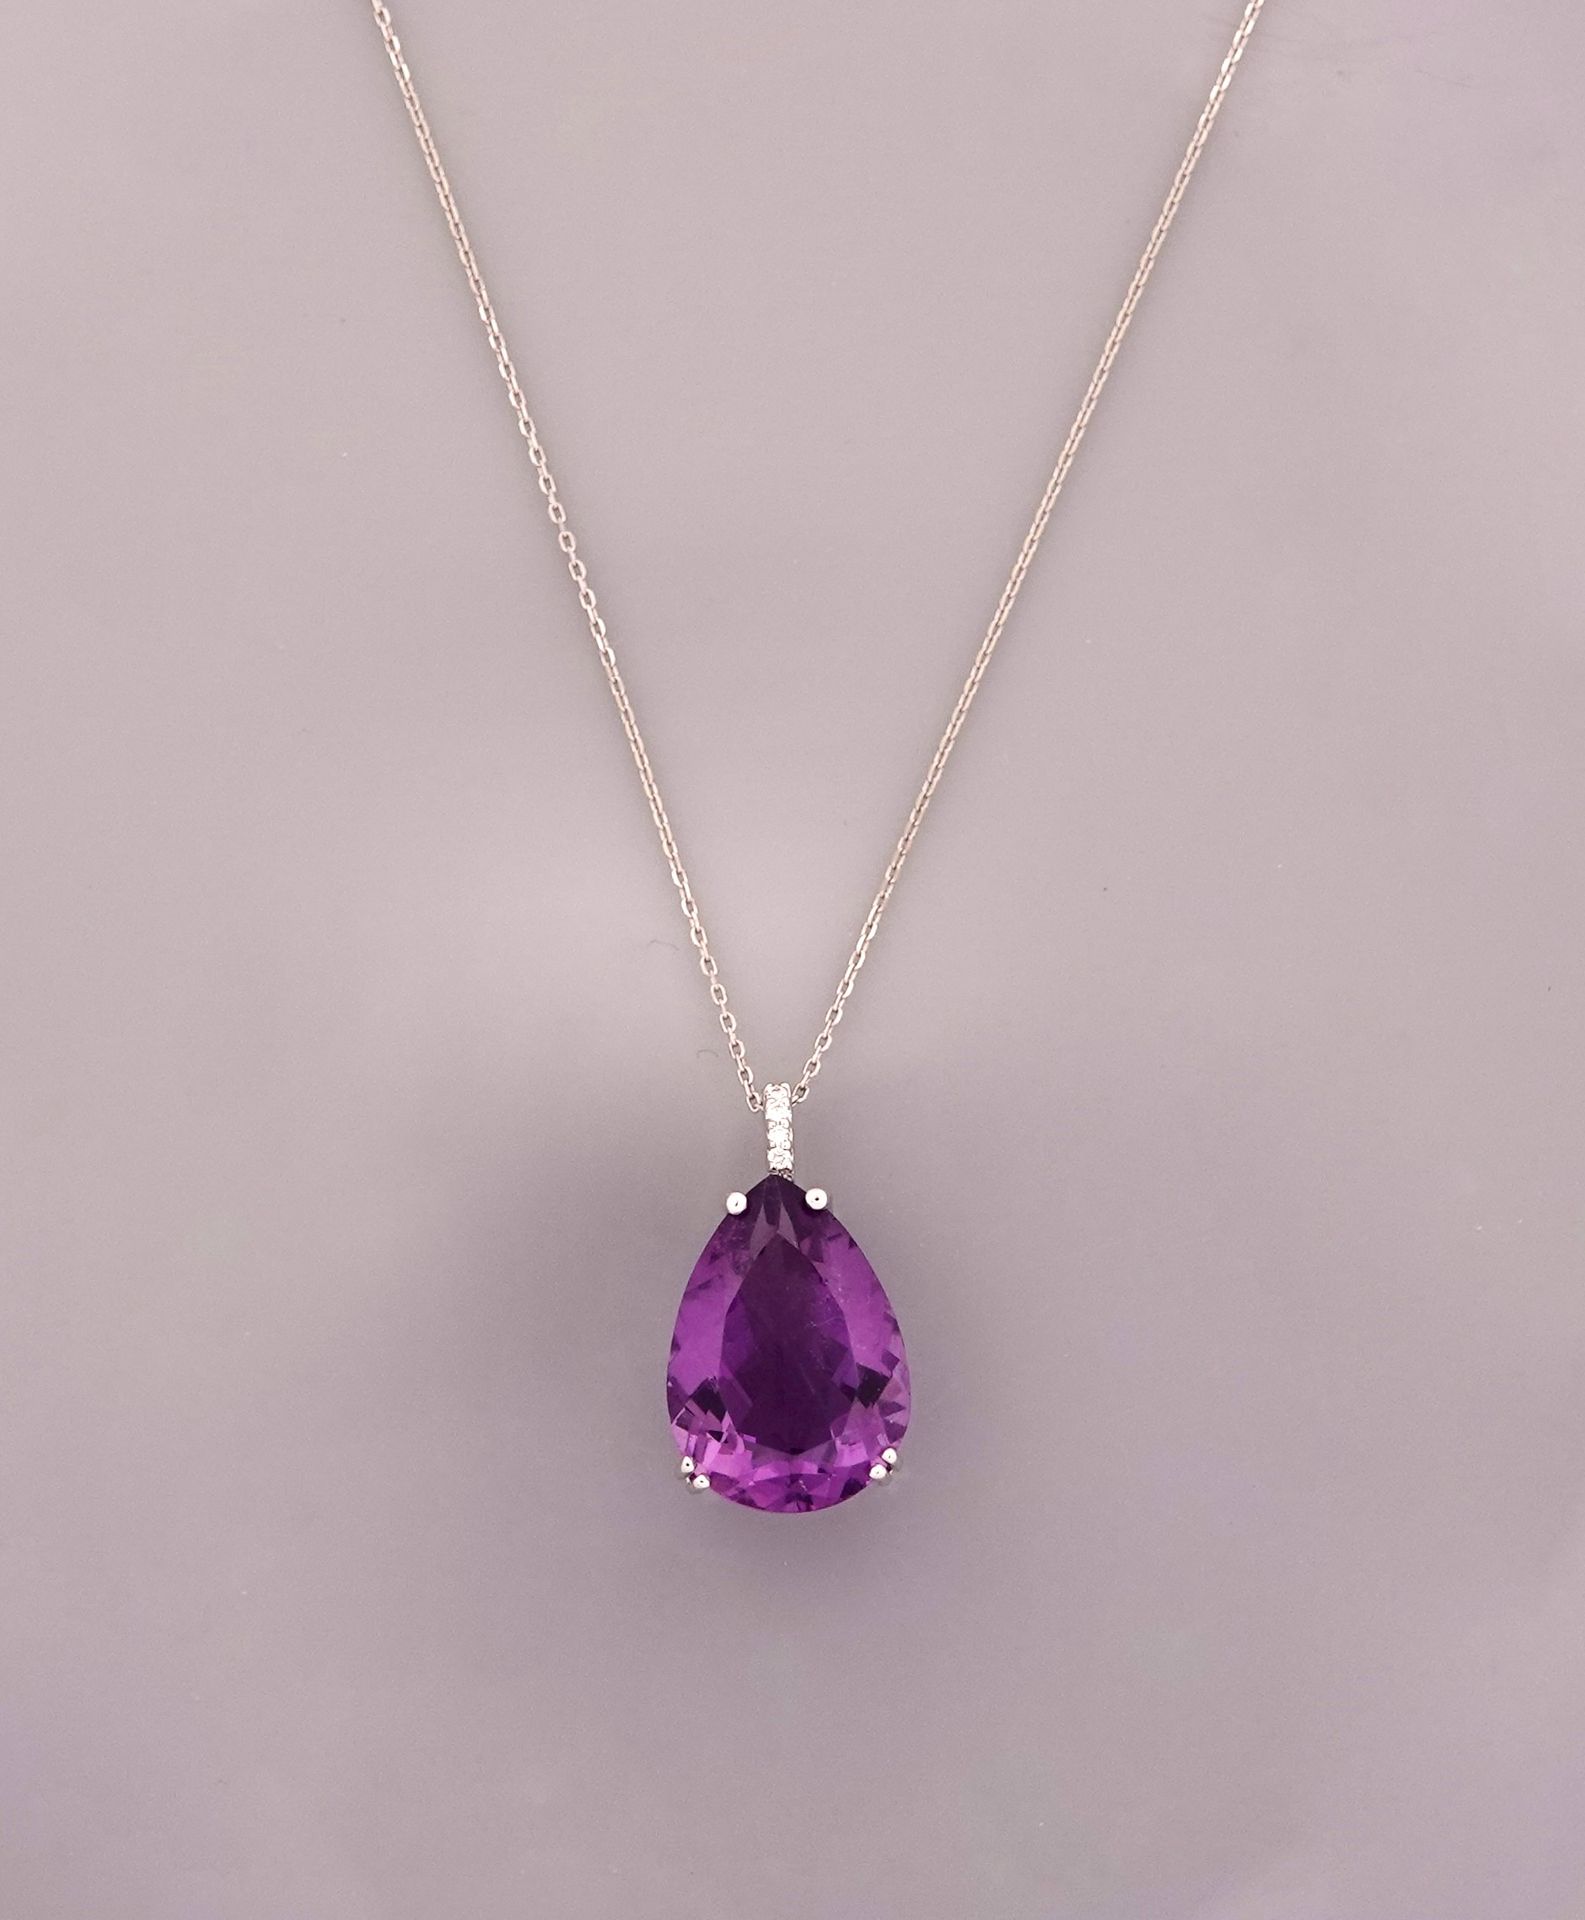 Null Chain and pendant in white gold, 750 MM, decorated with a pear-cut amethyst&hellip;